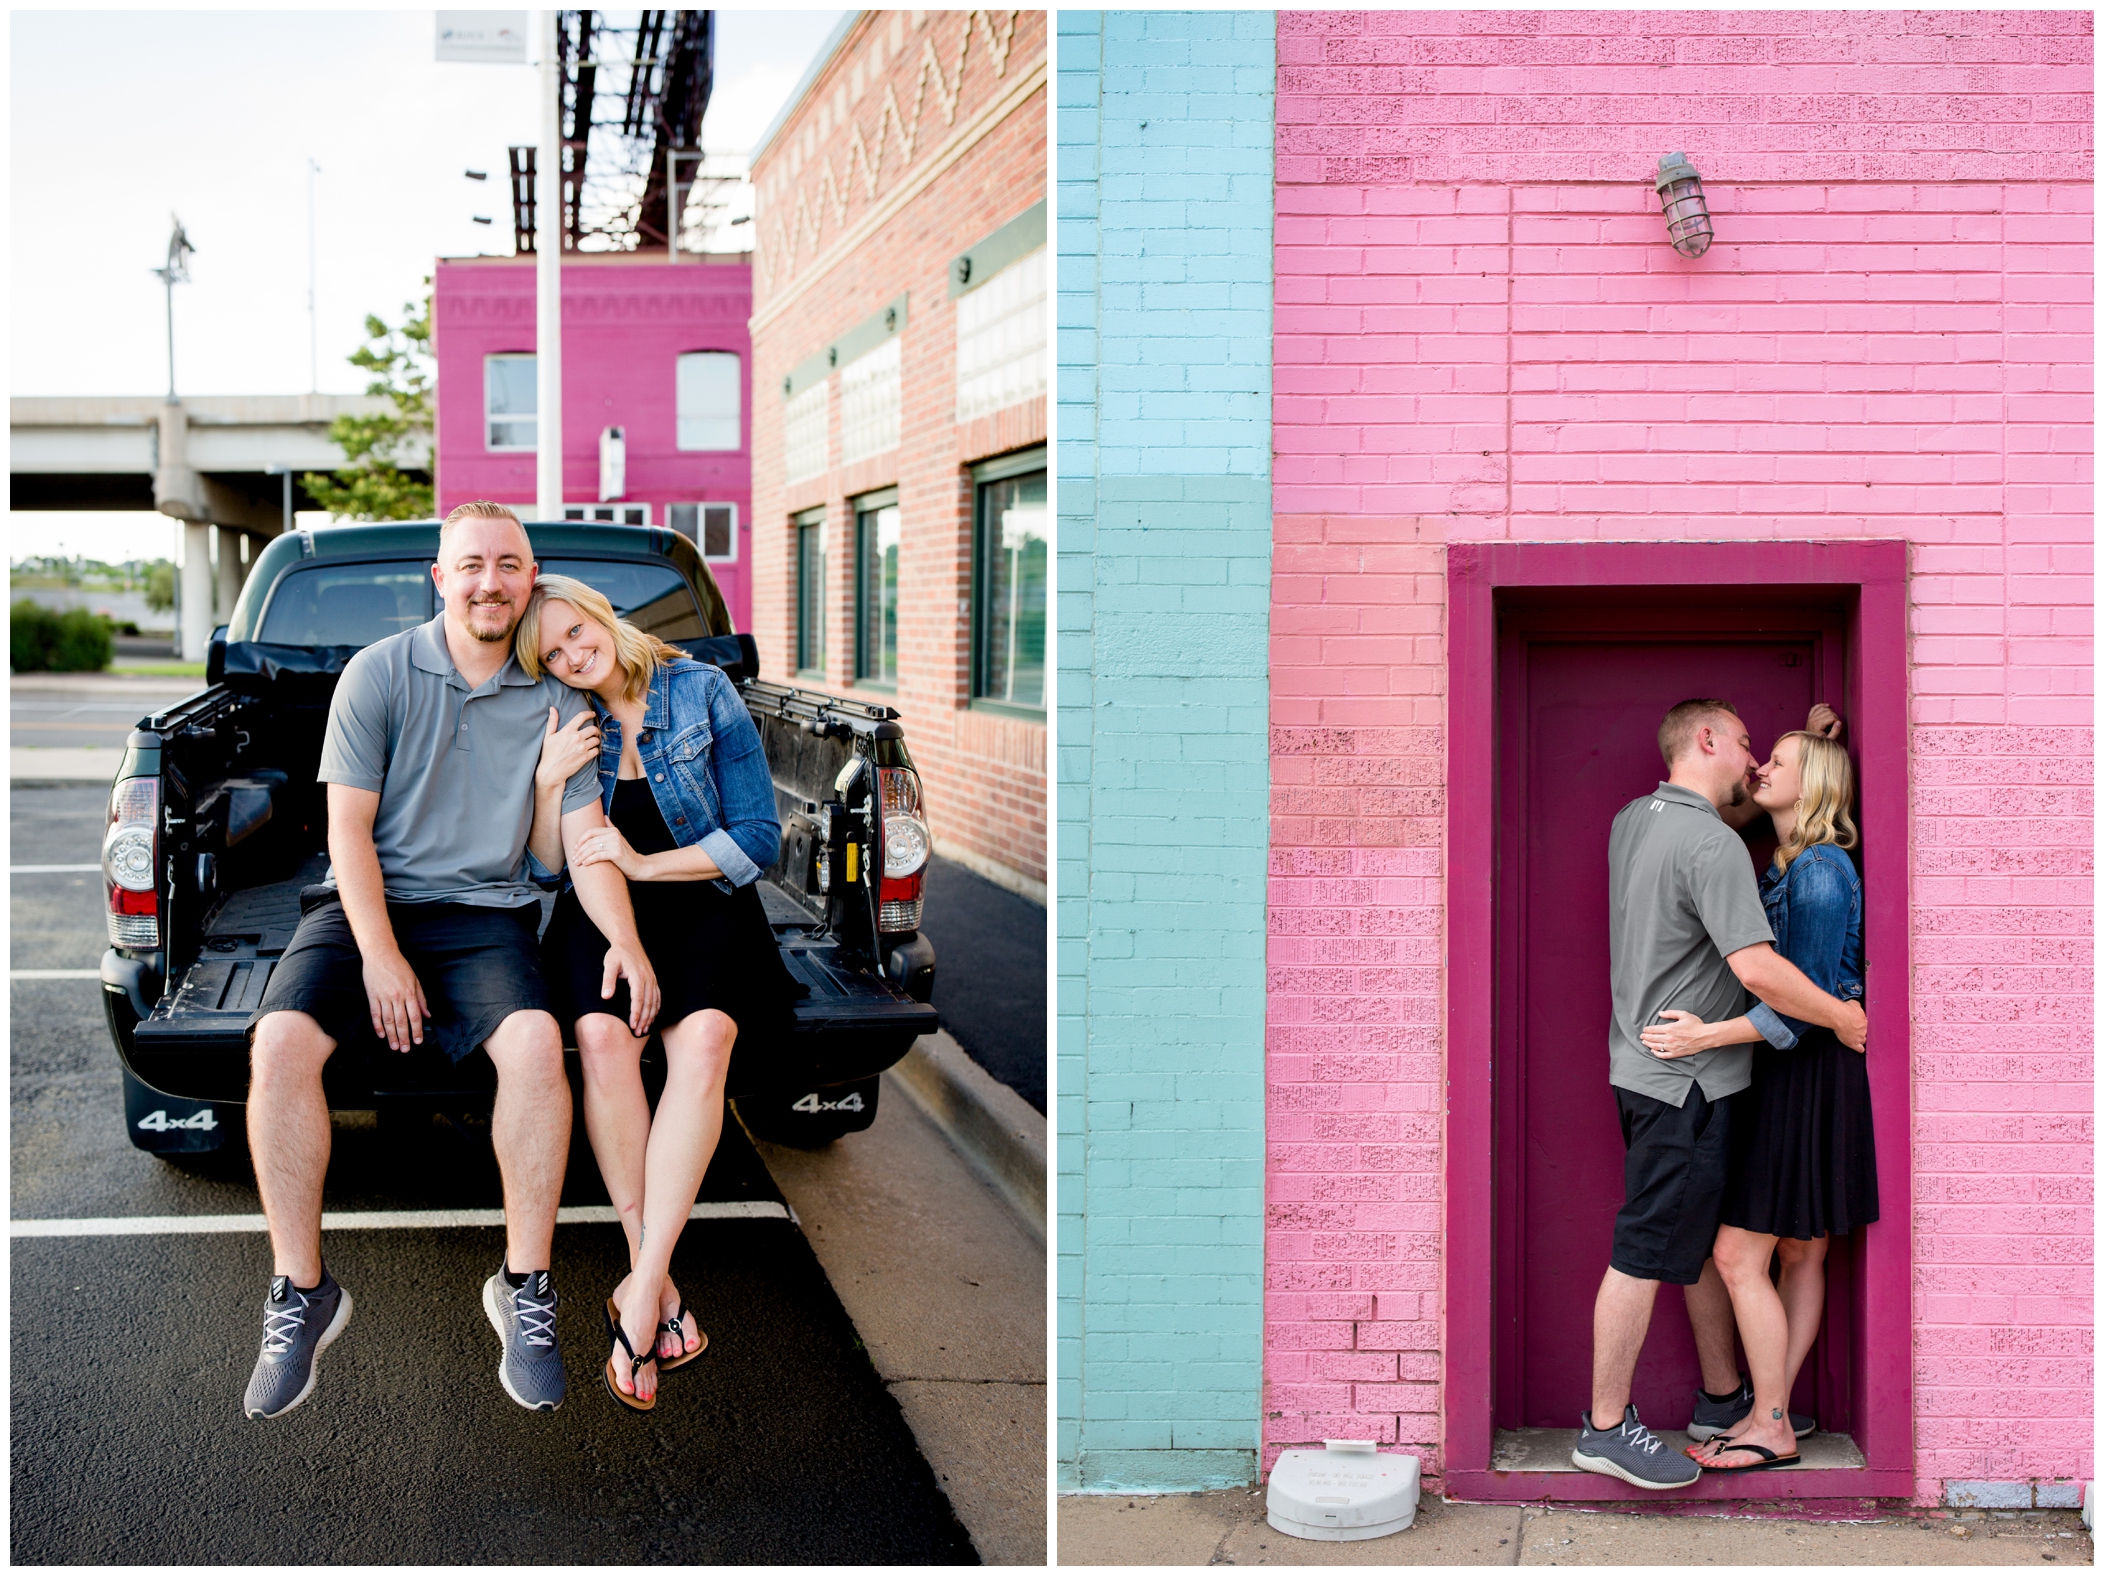 Denver engagement photographs at a colorful urban location 